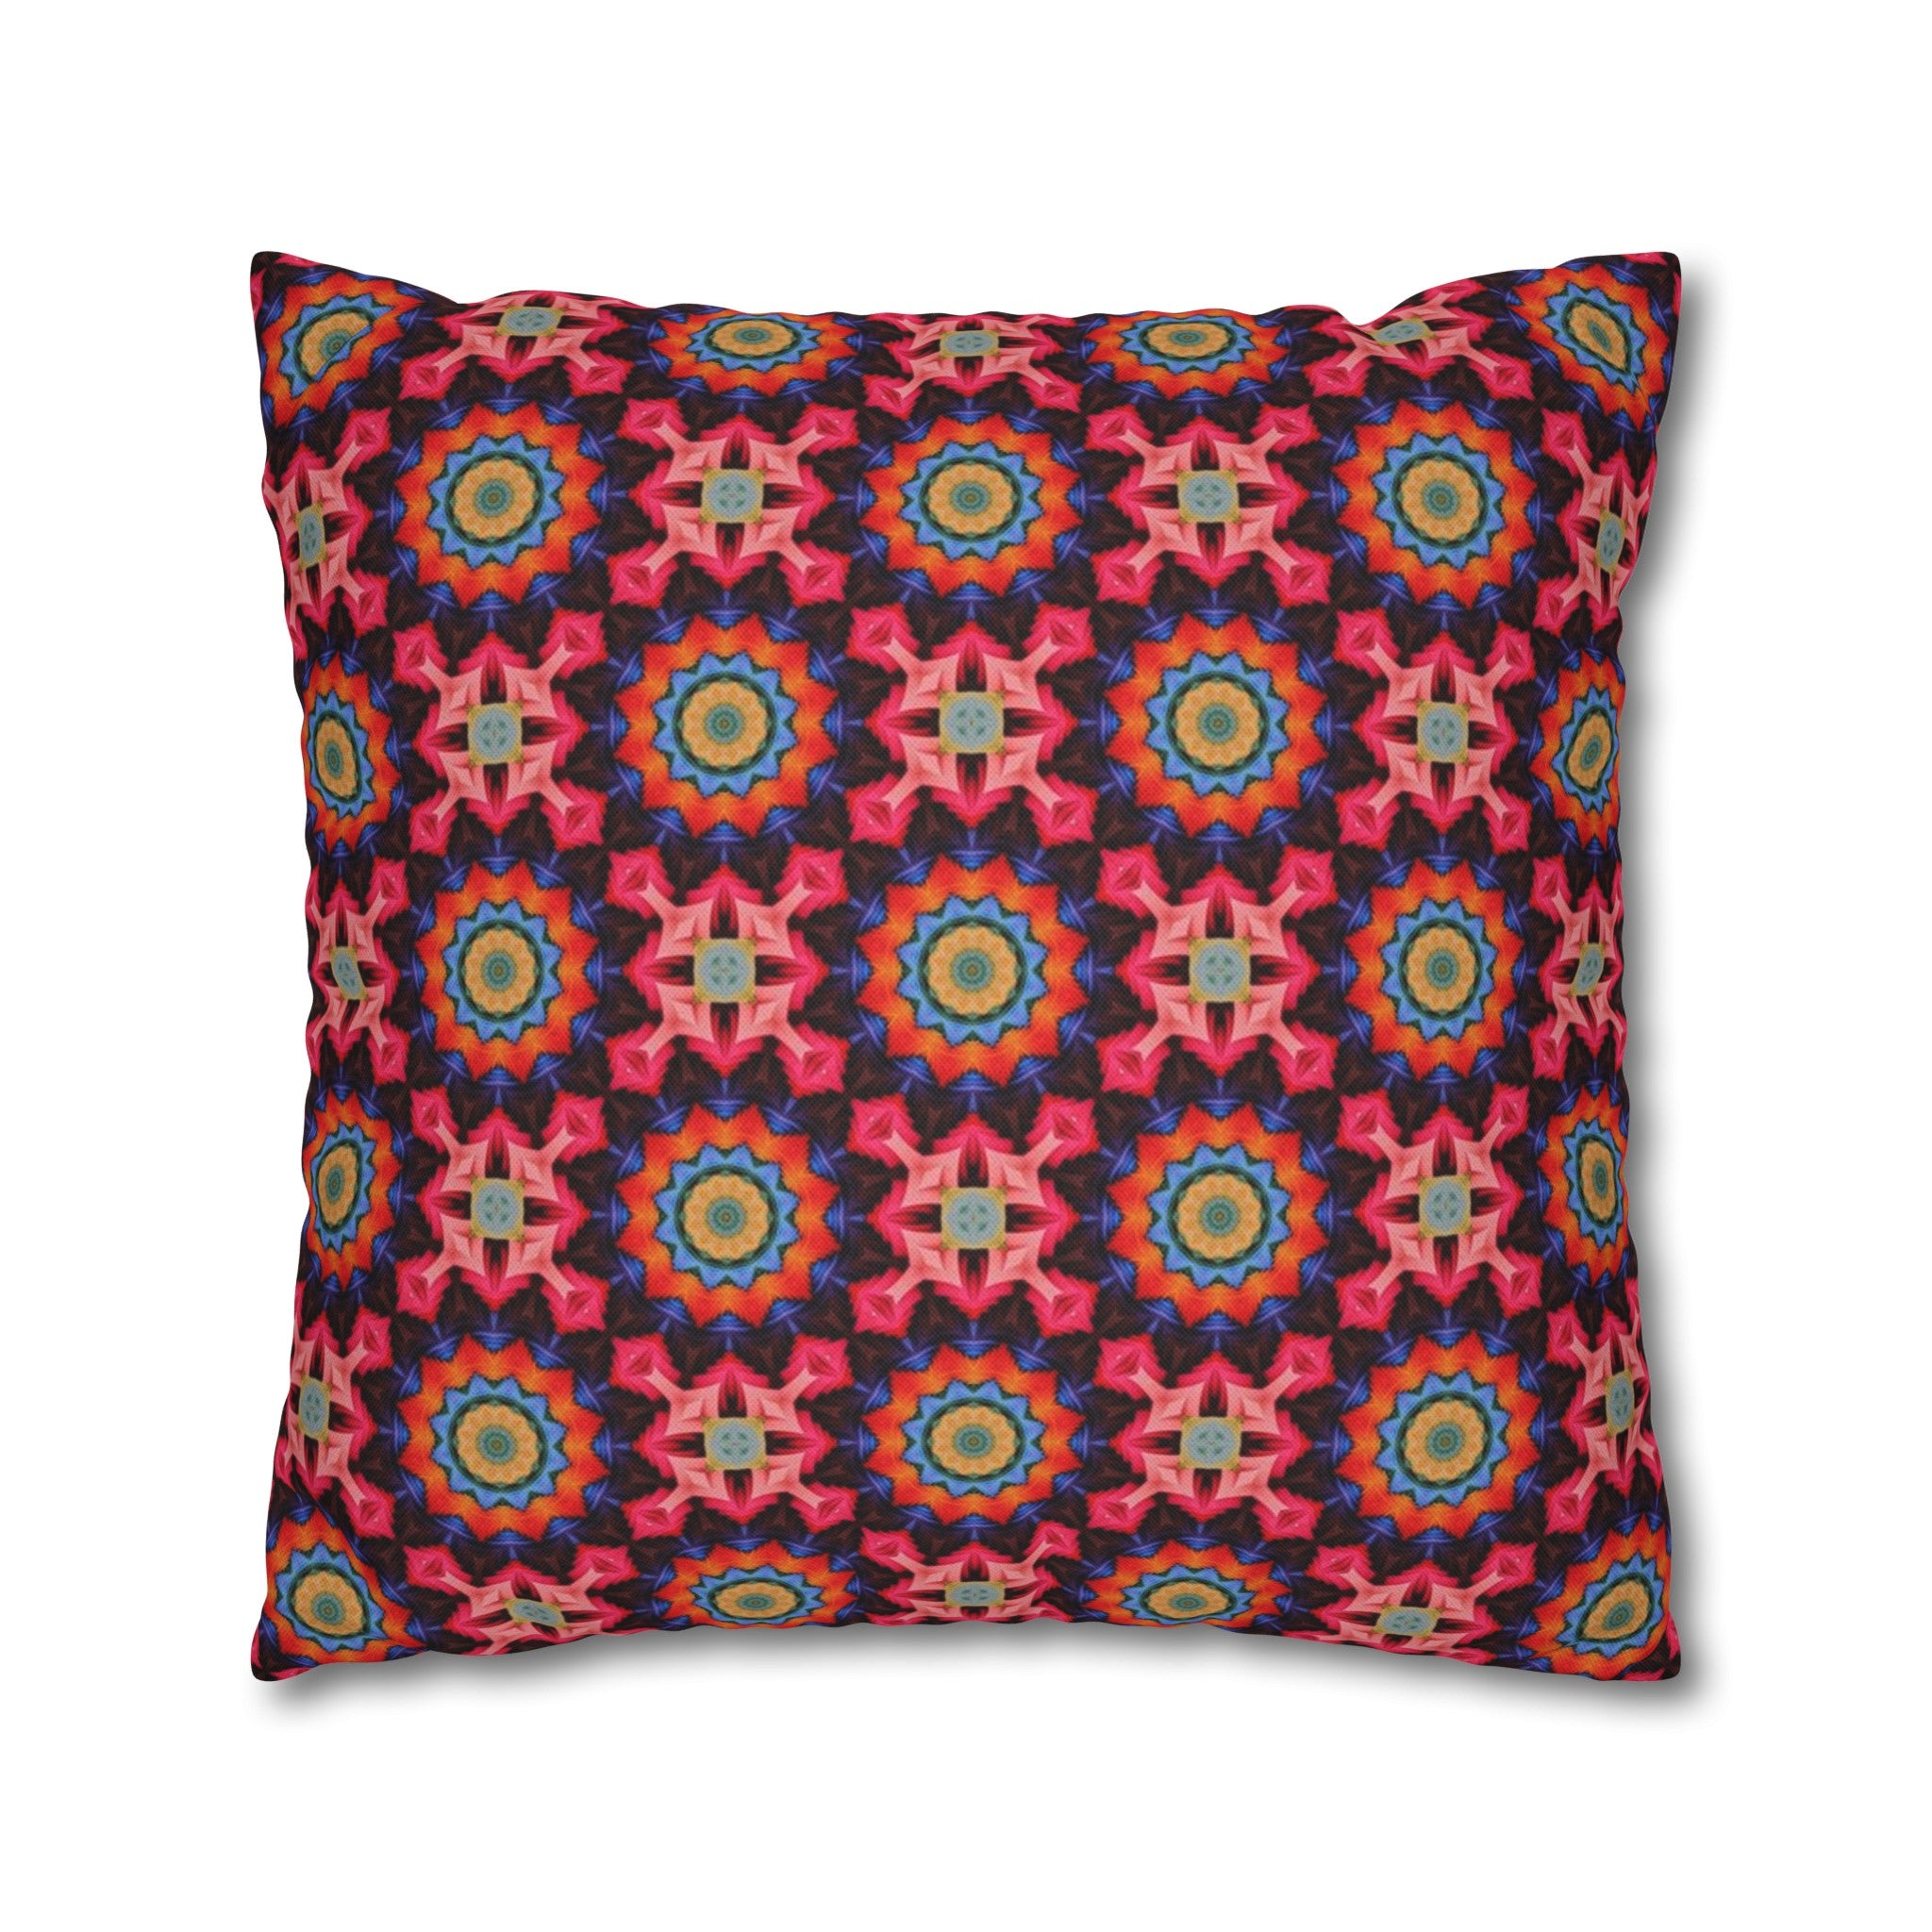 Kaleidoscope Pattern Square Pillow Cover - Spun Polyester Square Pillow - Home Decor - Couch Pillows